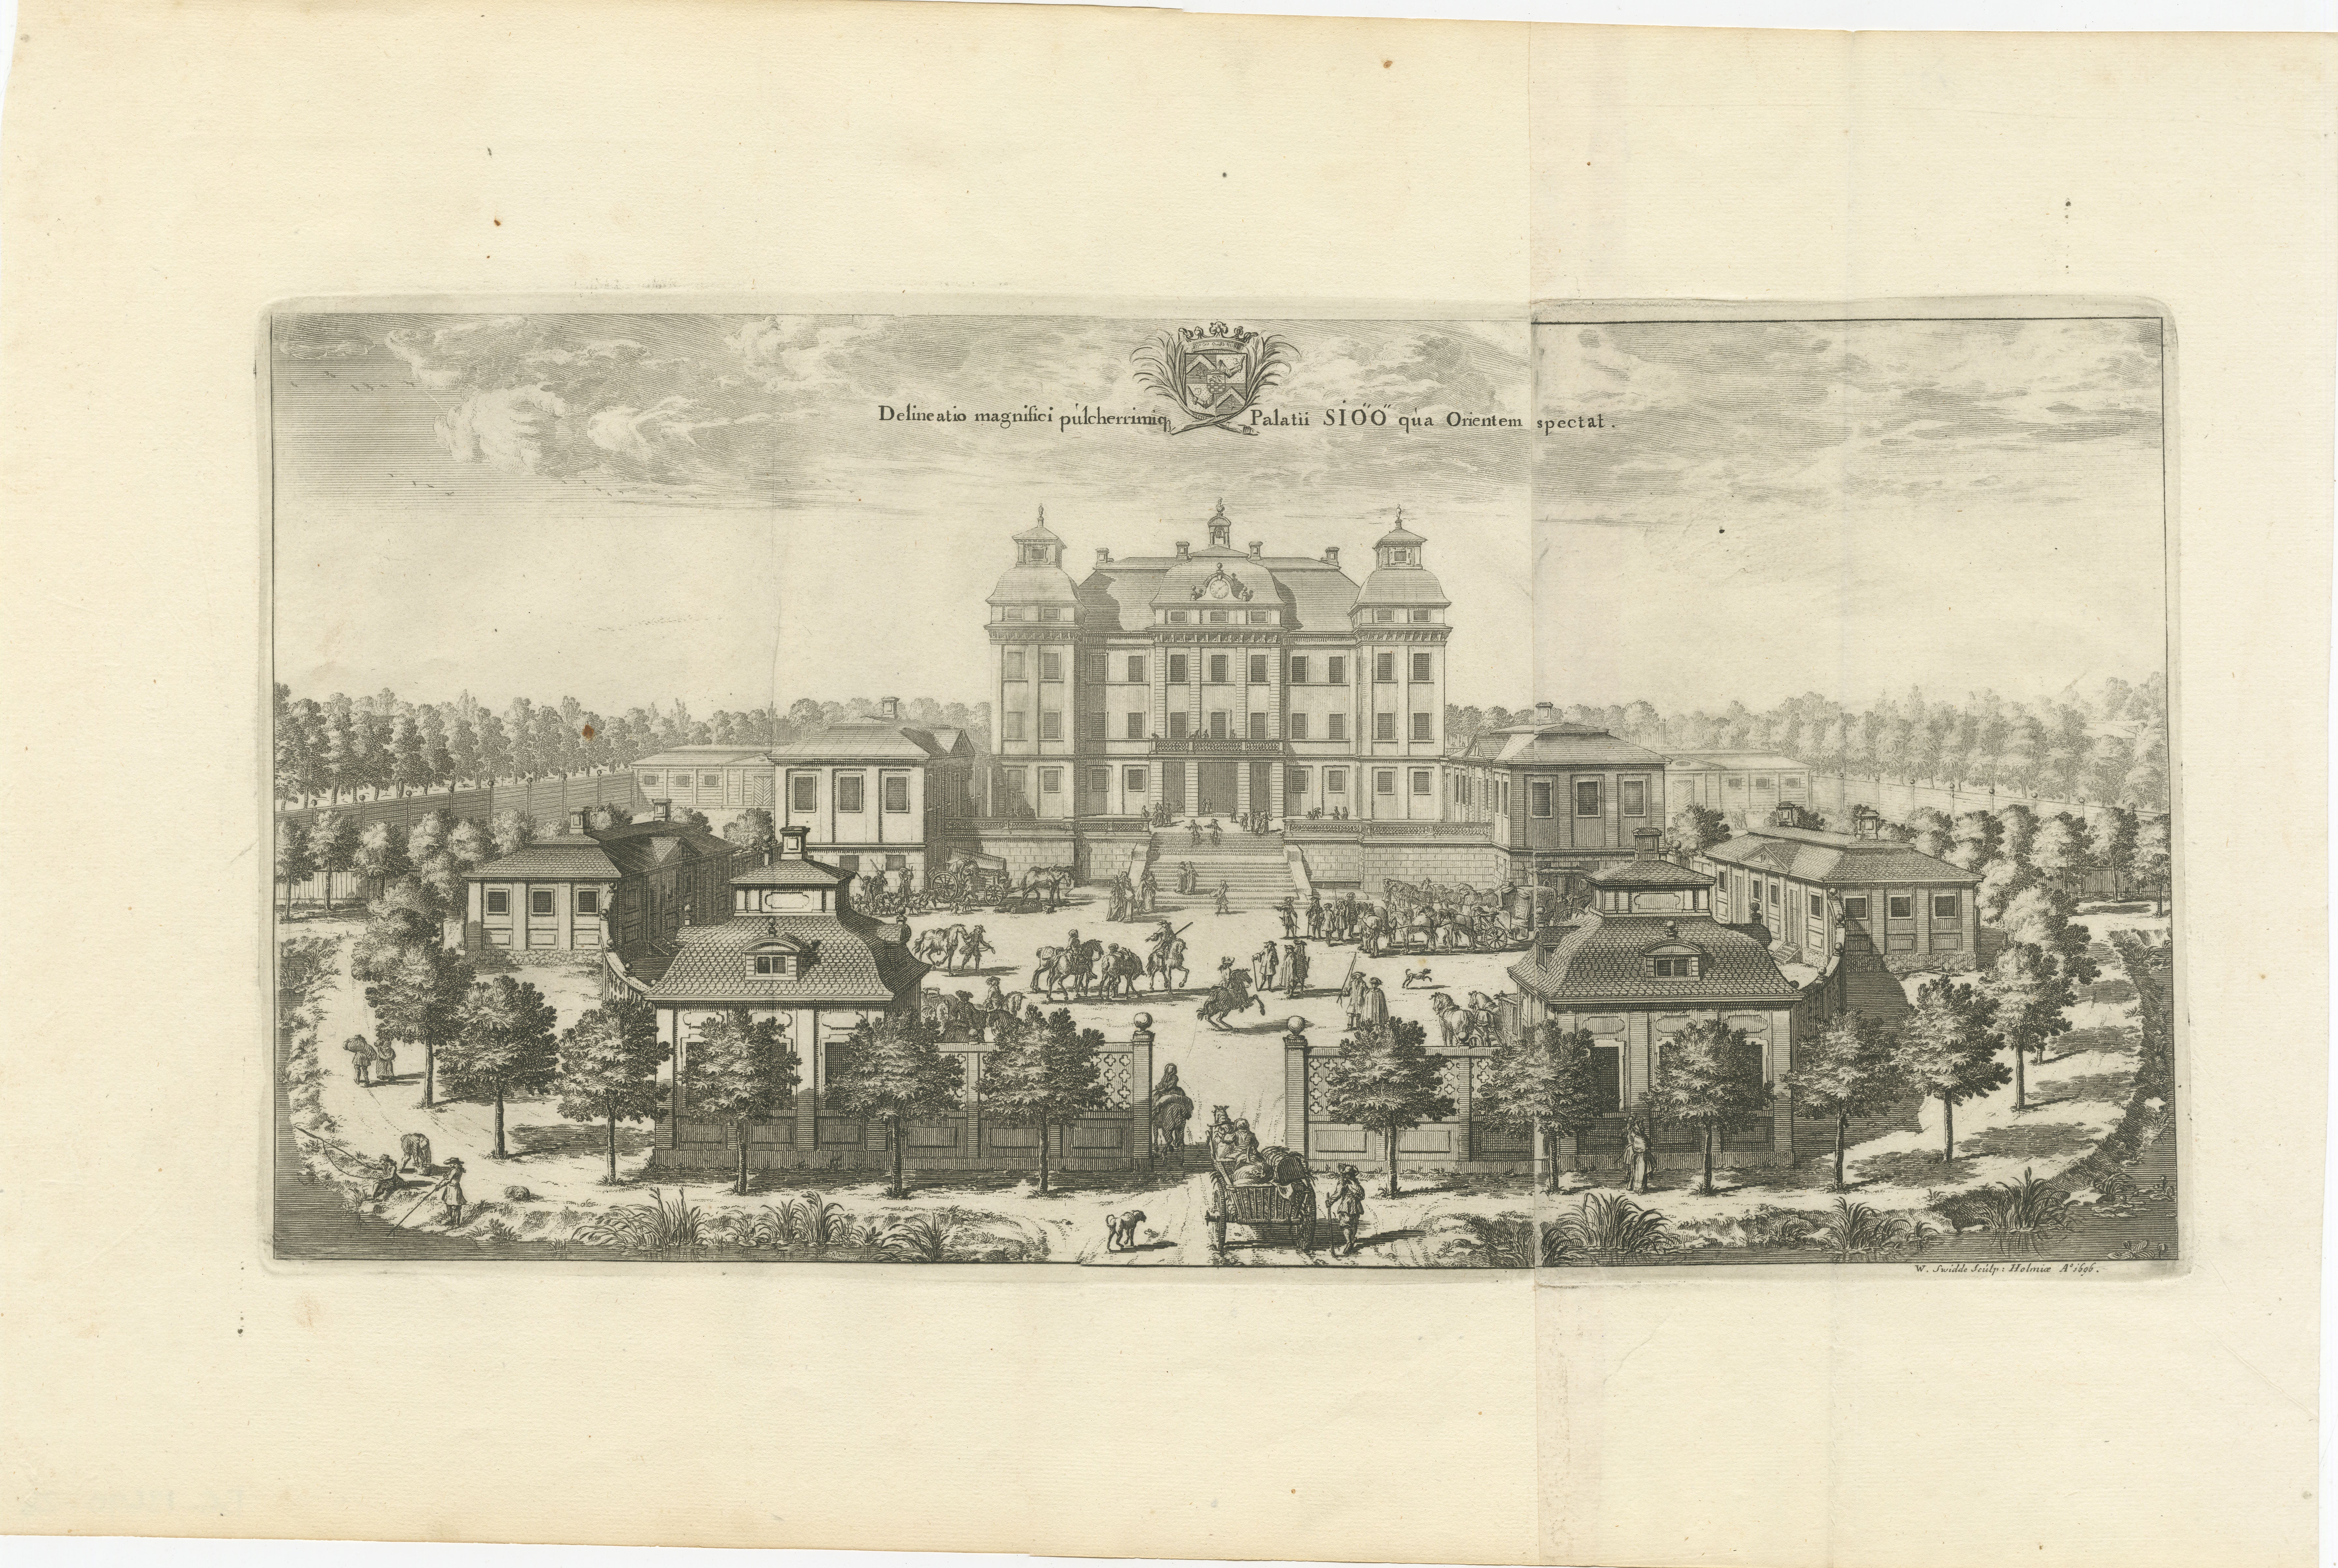 An engraving by Willem Swidde from 1696. The print features a palatial estate surrounded by formal gardens, a common representation of baroque architecture and landscaping. The central building is flanked by two symmetrically placed wings, with a